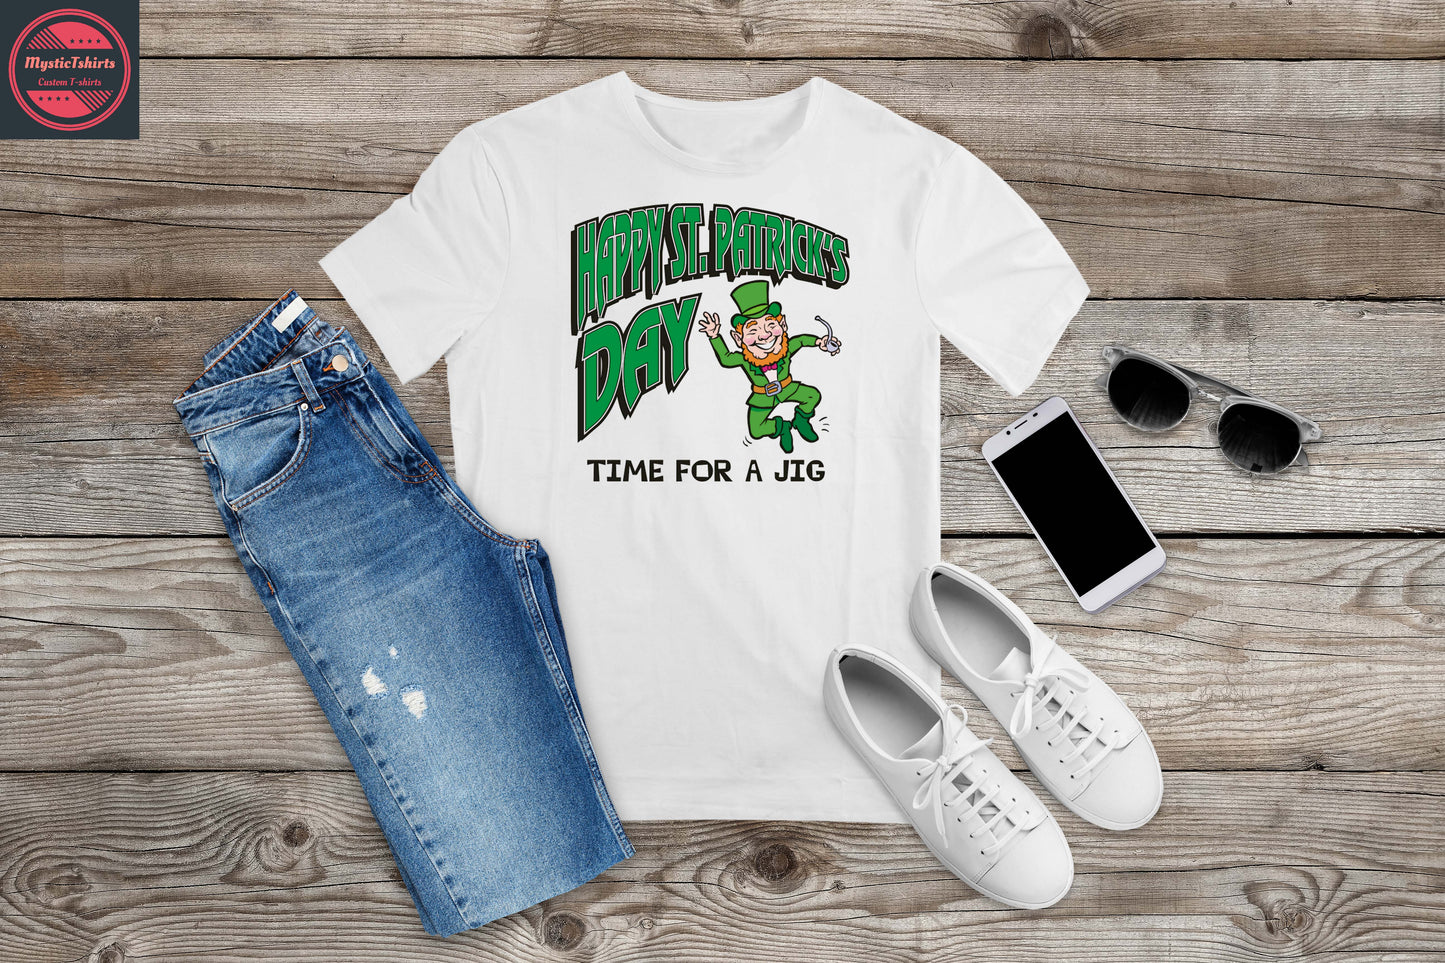 189. HAPPY ST PATRICK'S DAY TIME FOR A JIG, Custom Made Shirt, Personalized T-Shirt, Custom Text, Make Your Own Shirt, Custom Tee